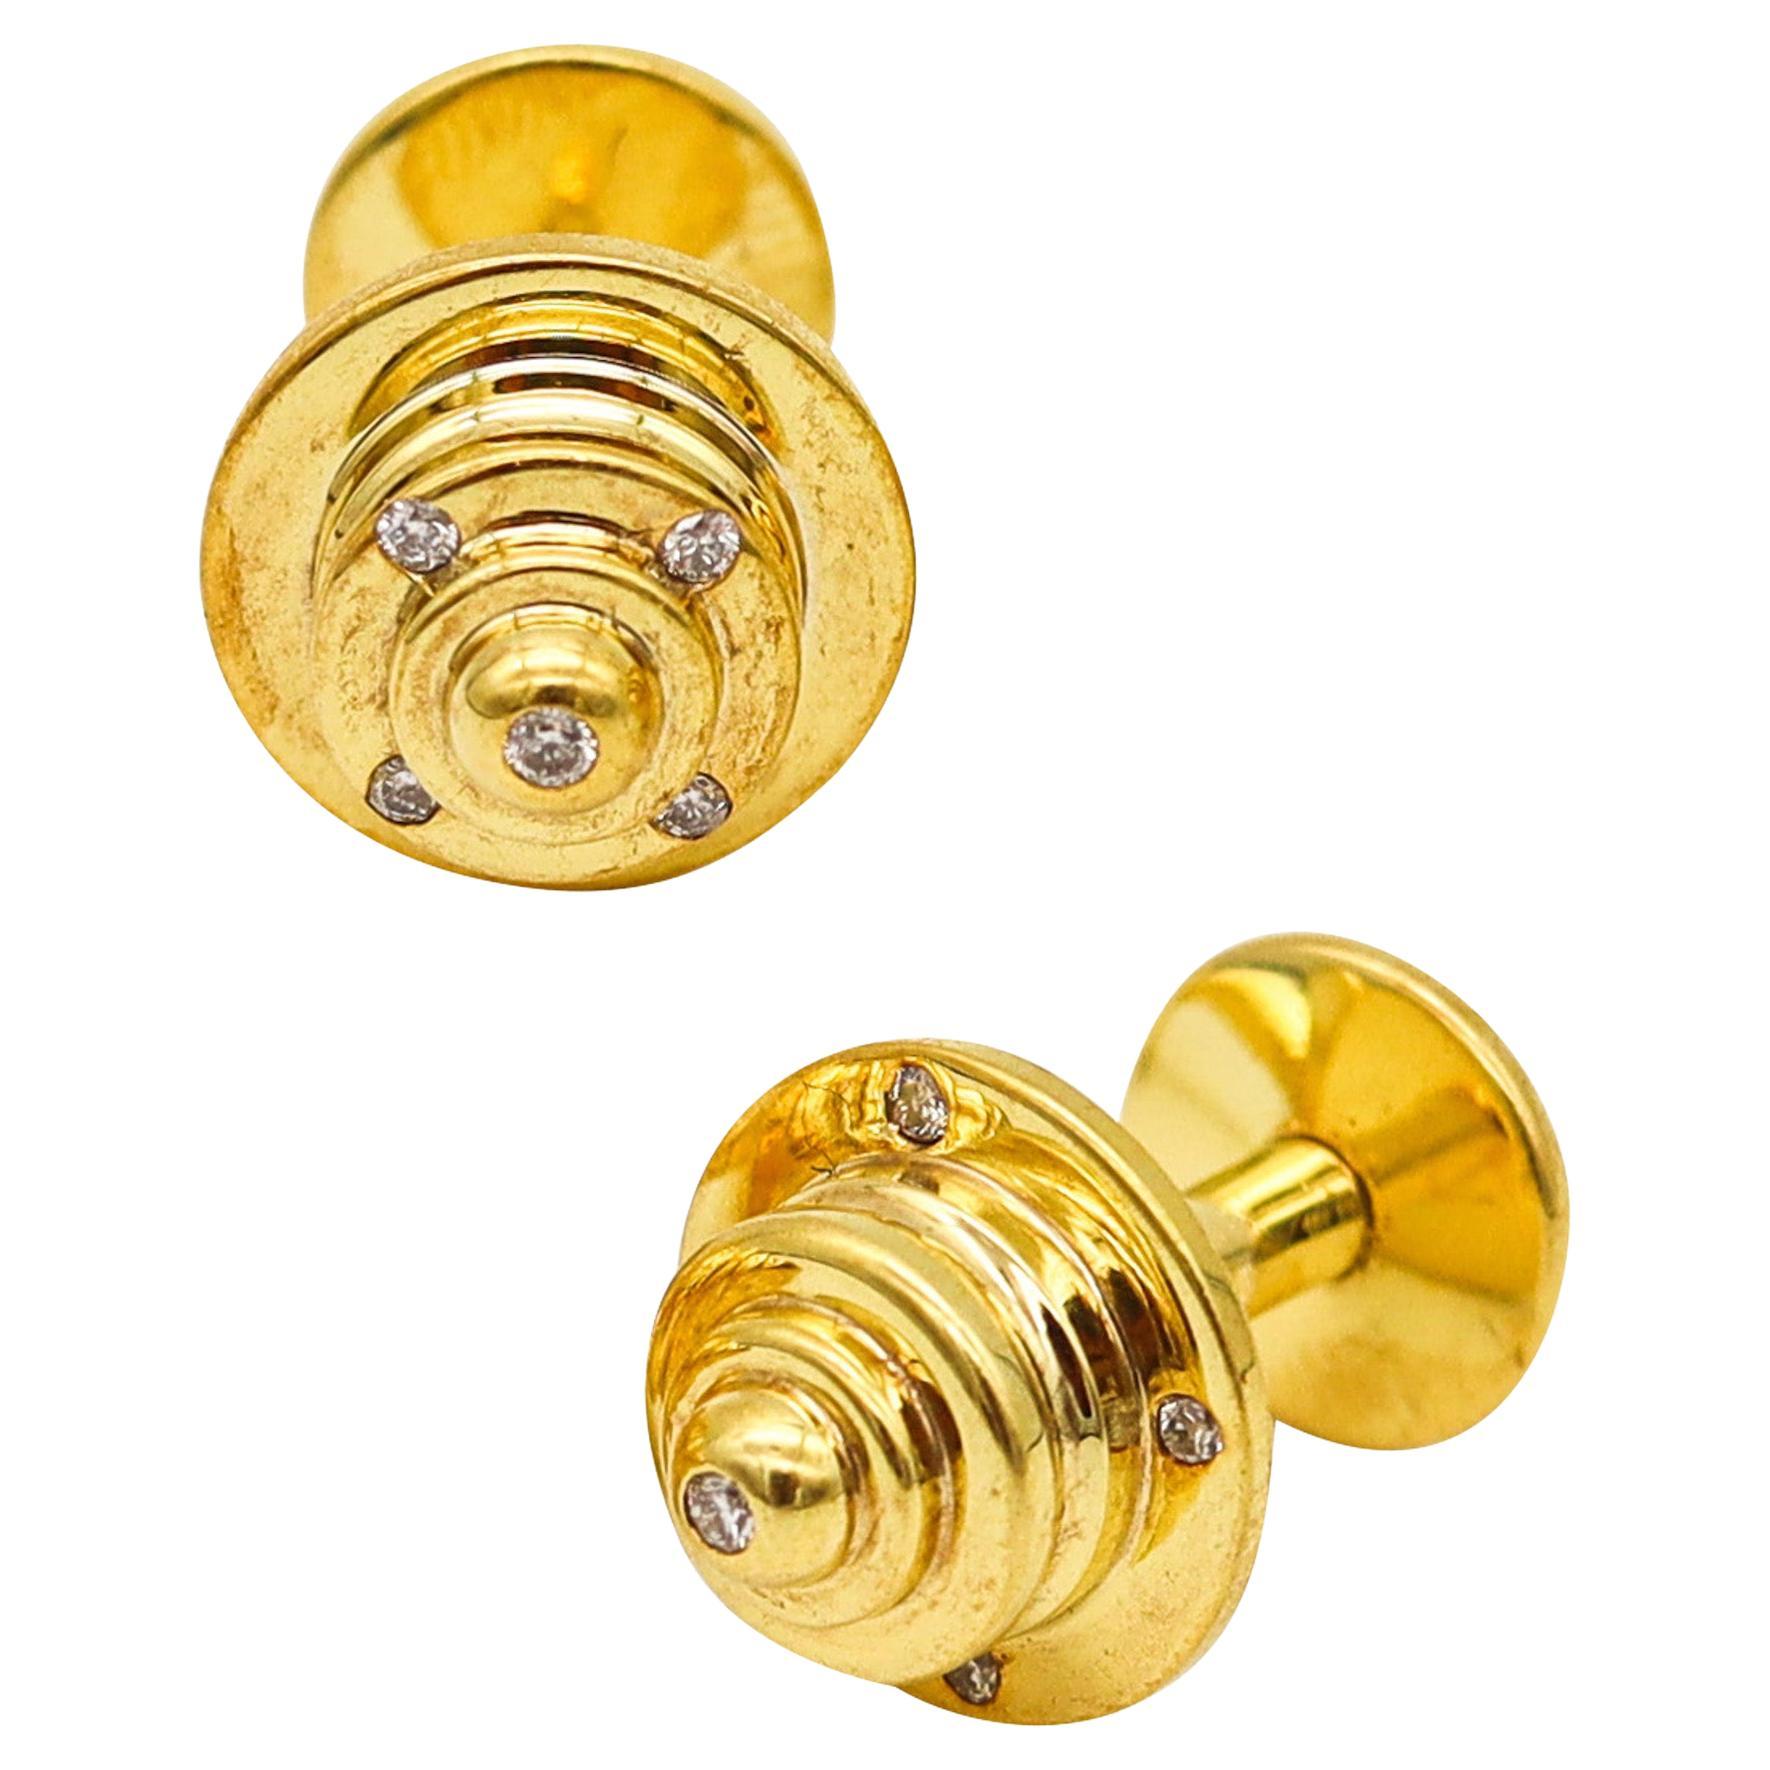 Tiffany & Co. 1987 Paloma Picasso Diamonds Cufflinks in 18 Kt Gold over Sterling